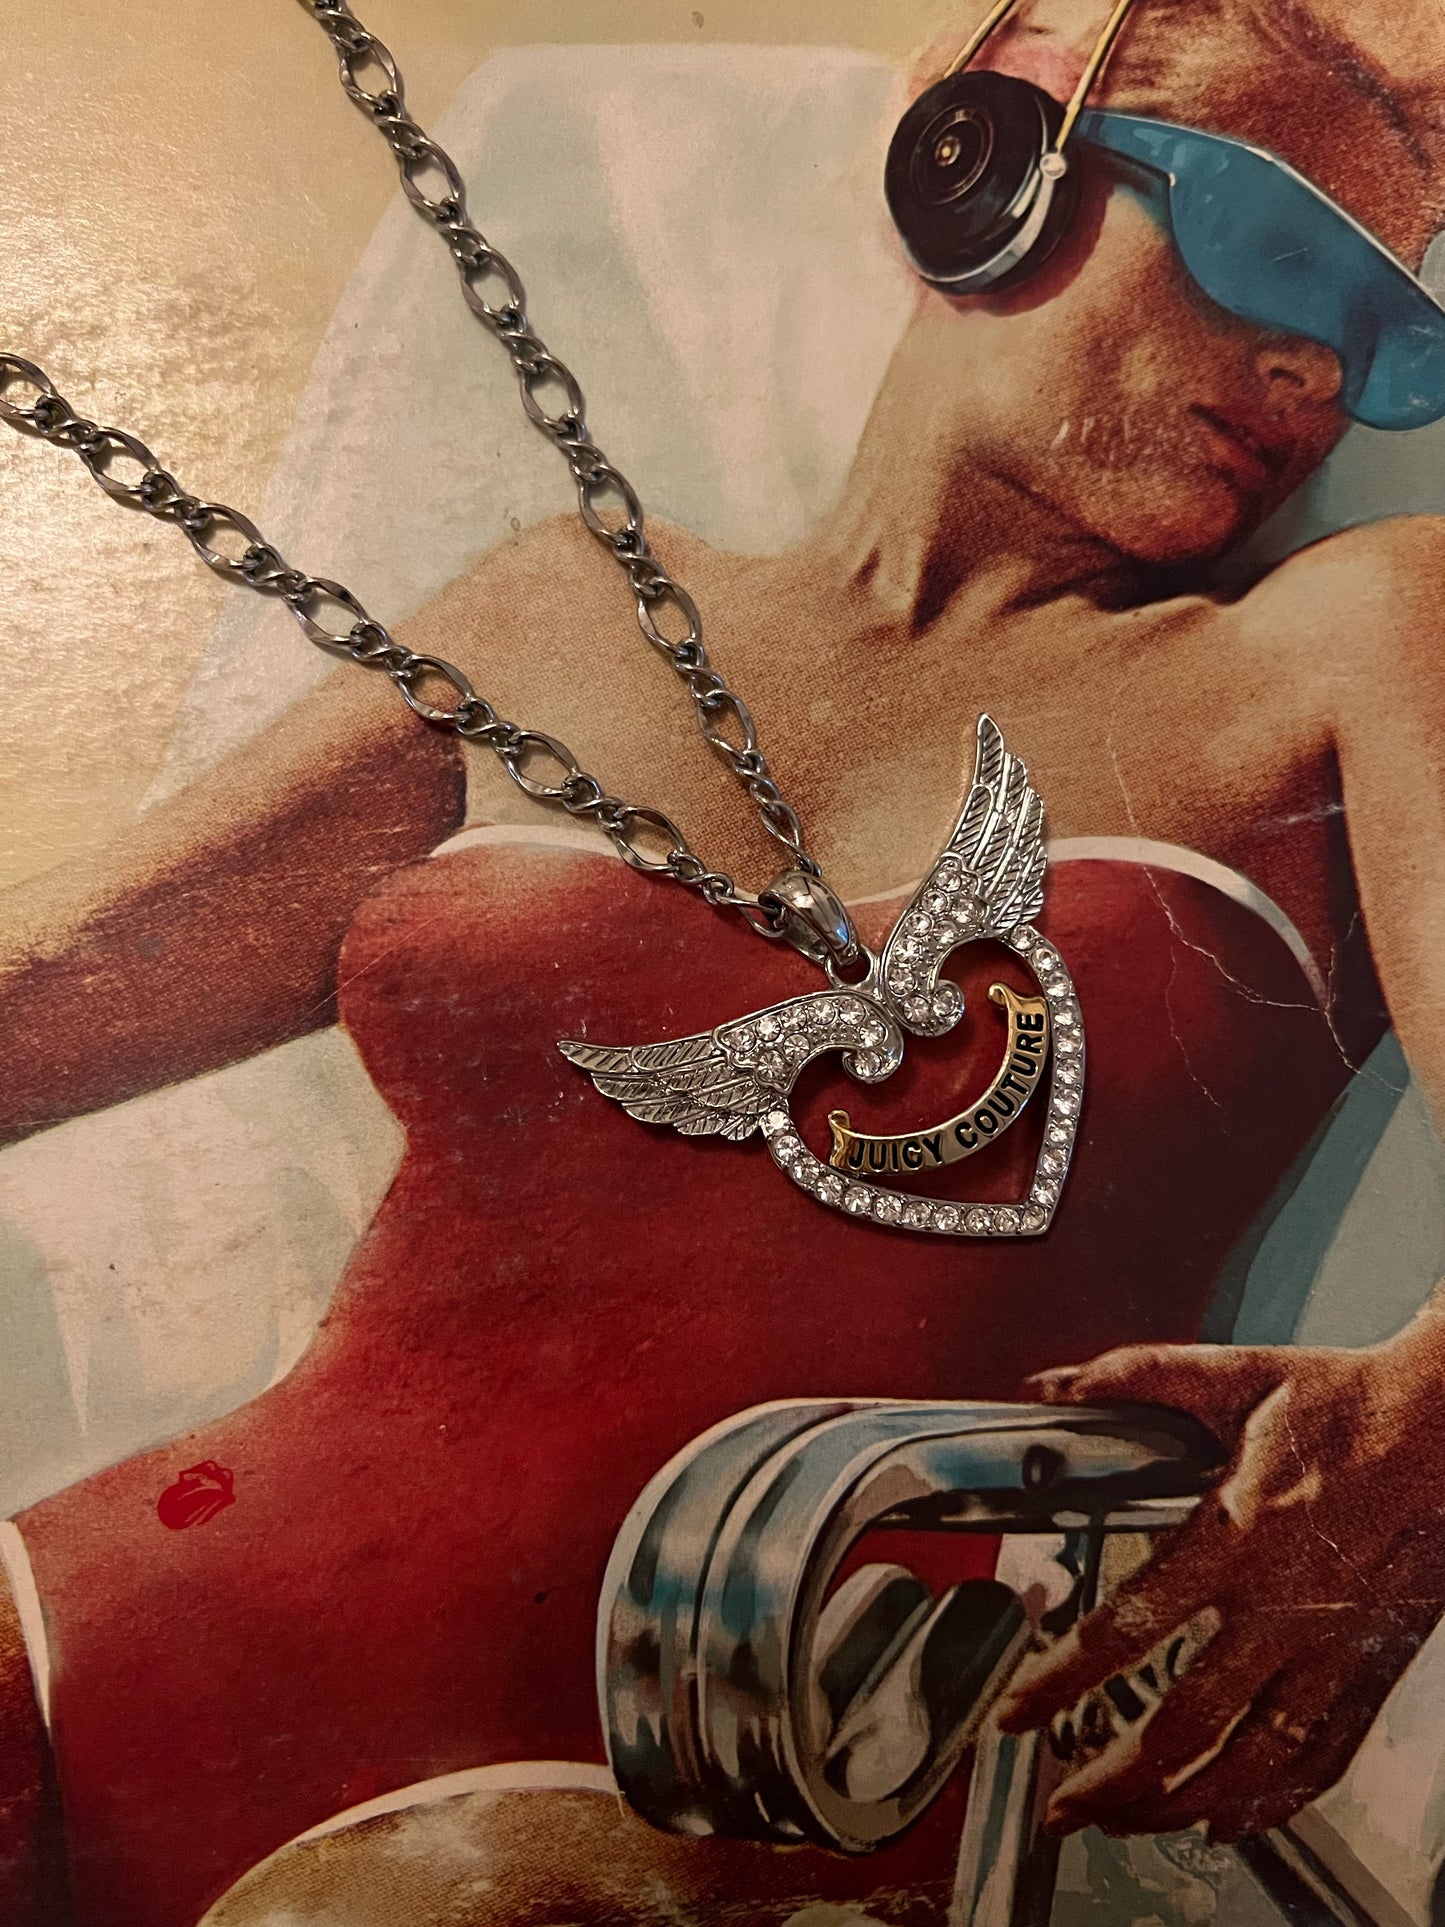 Juicy Winged Heart Necklace